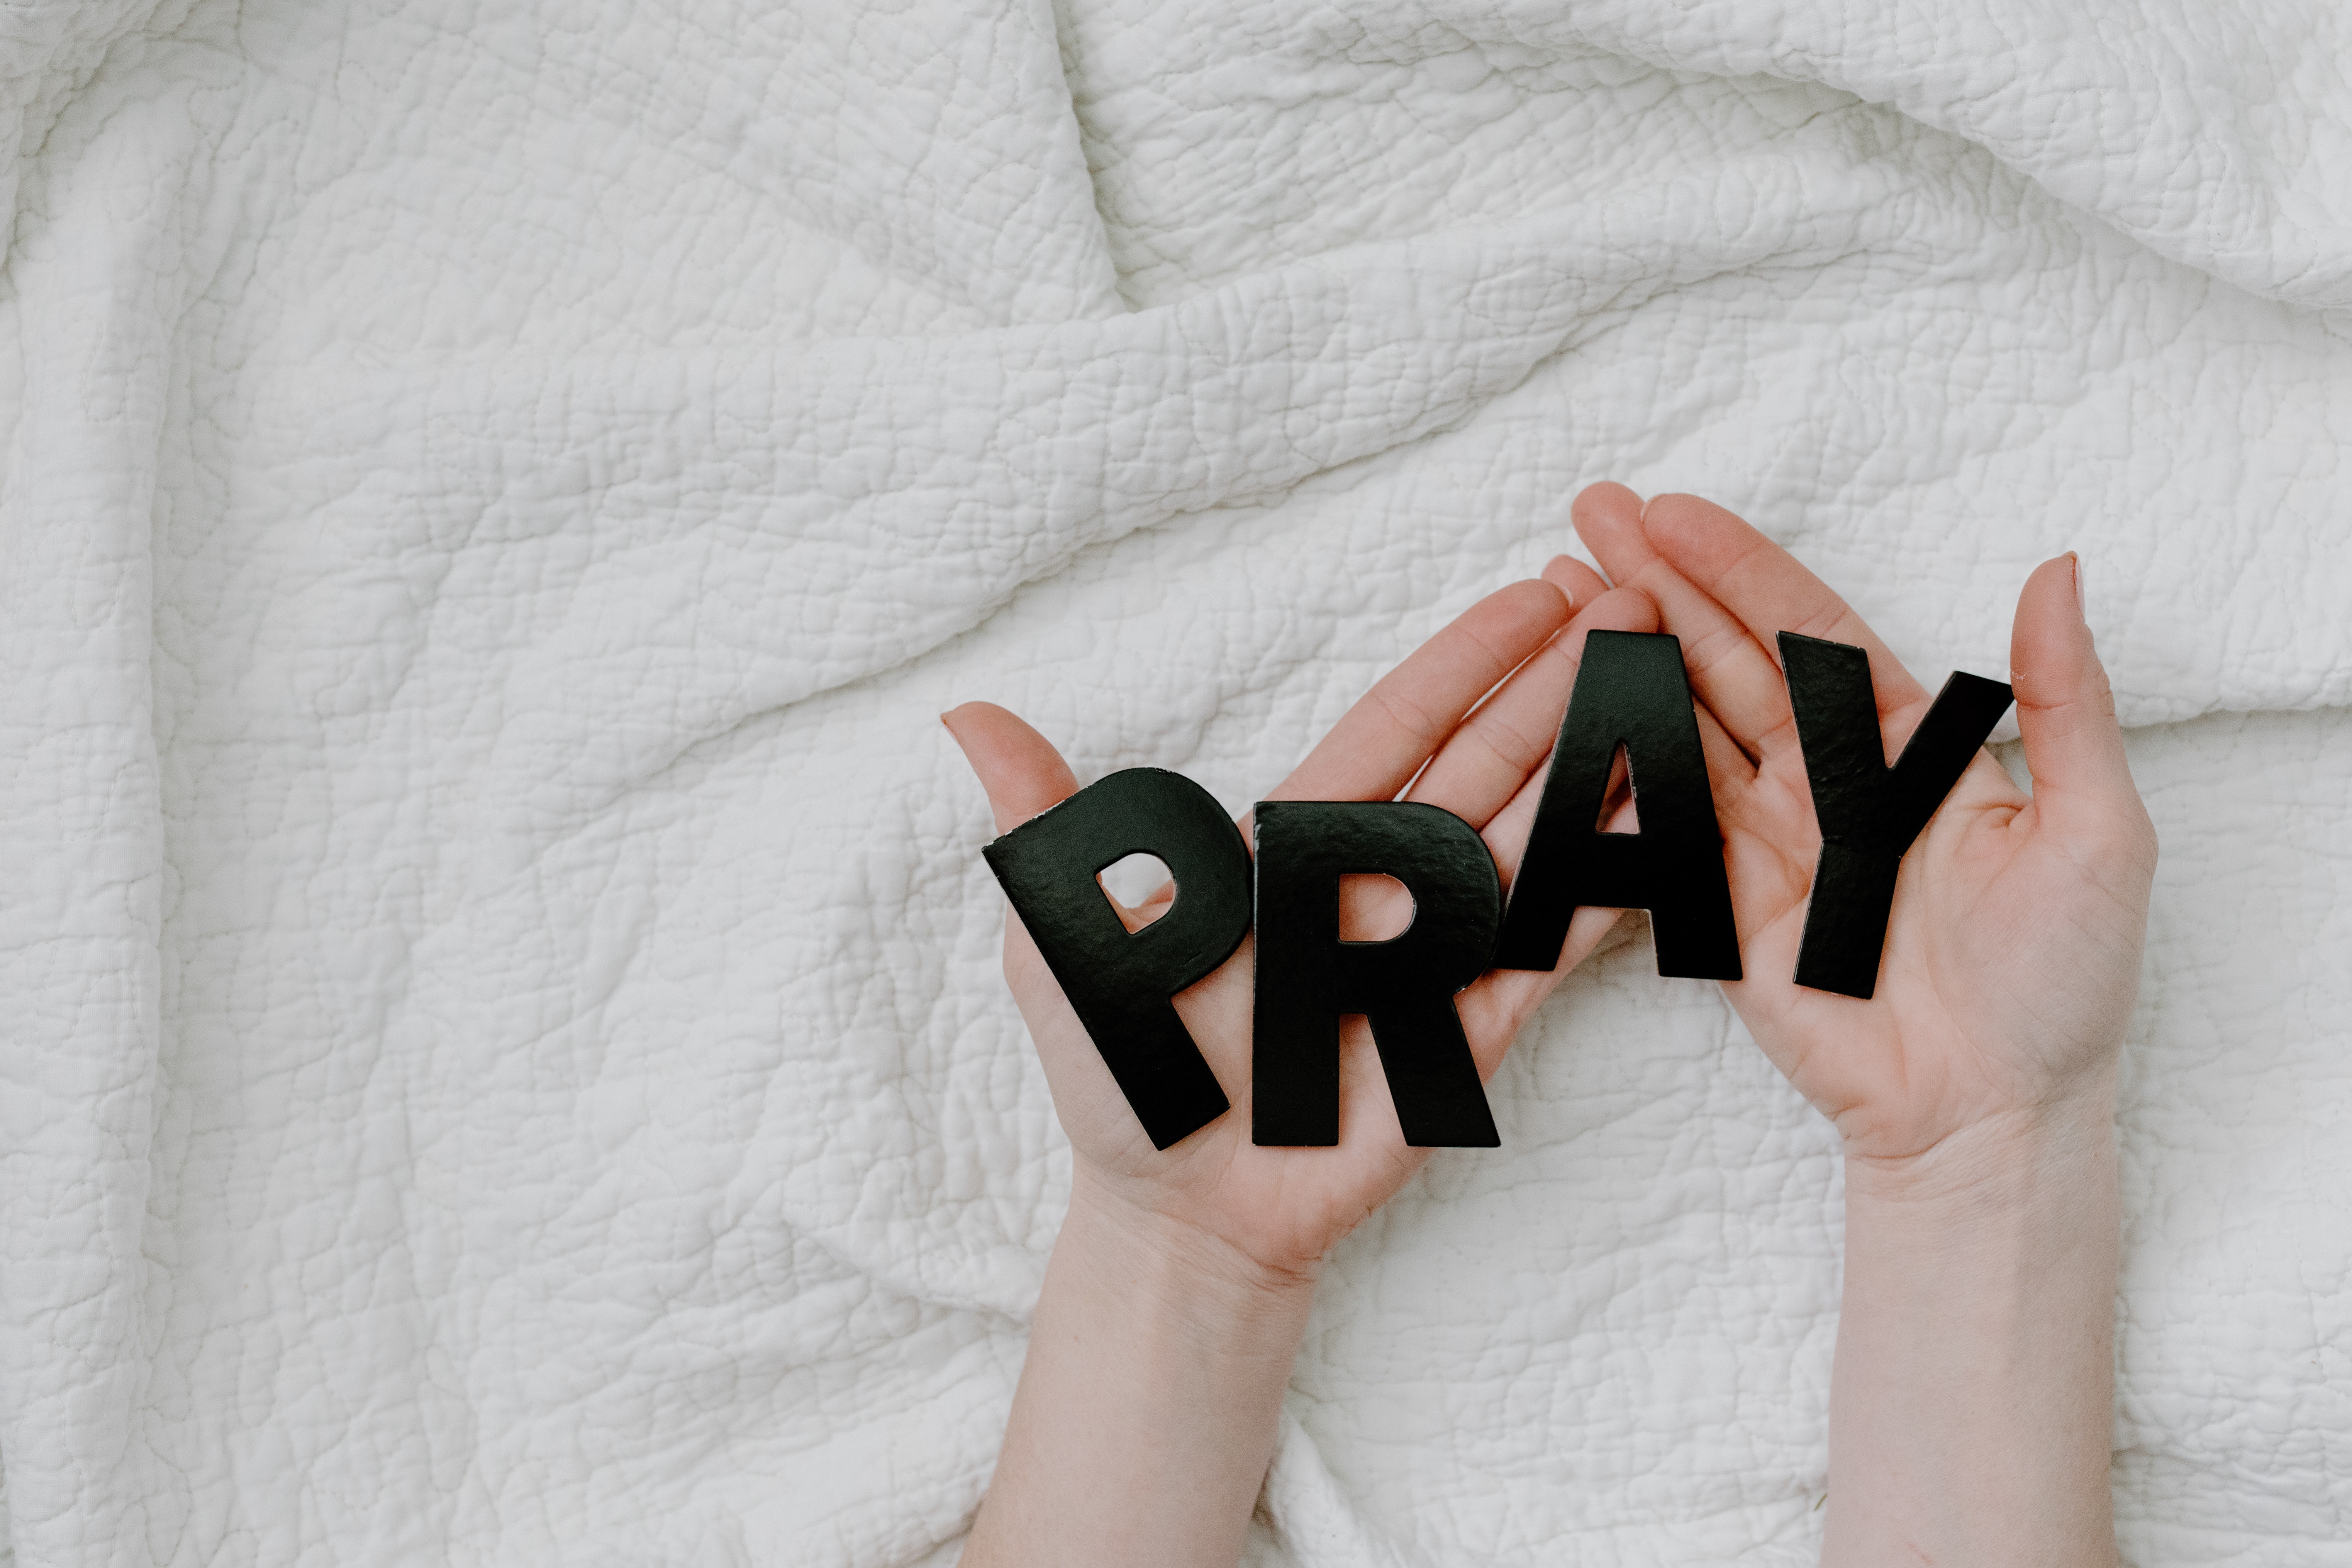 The Need for Prayer